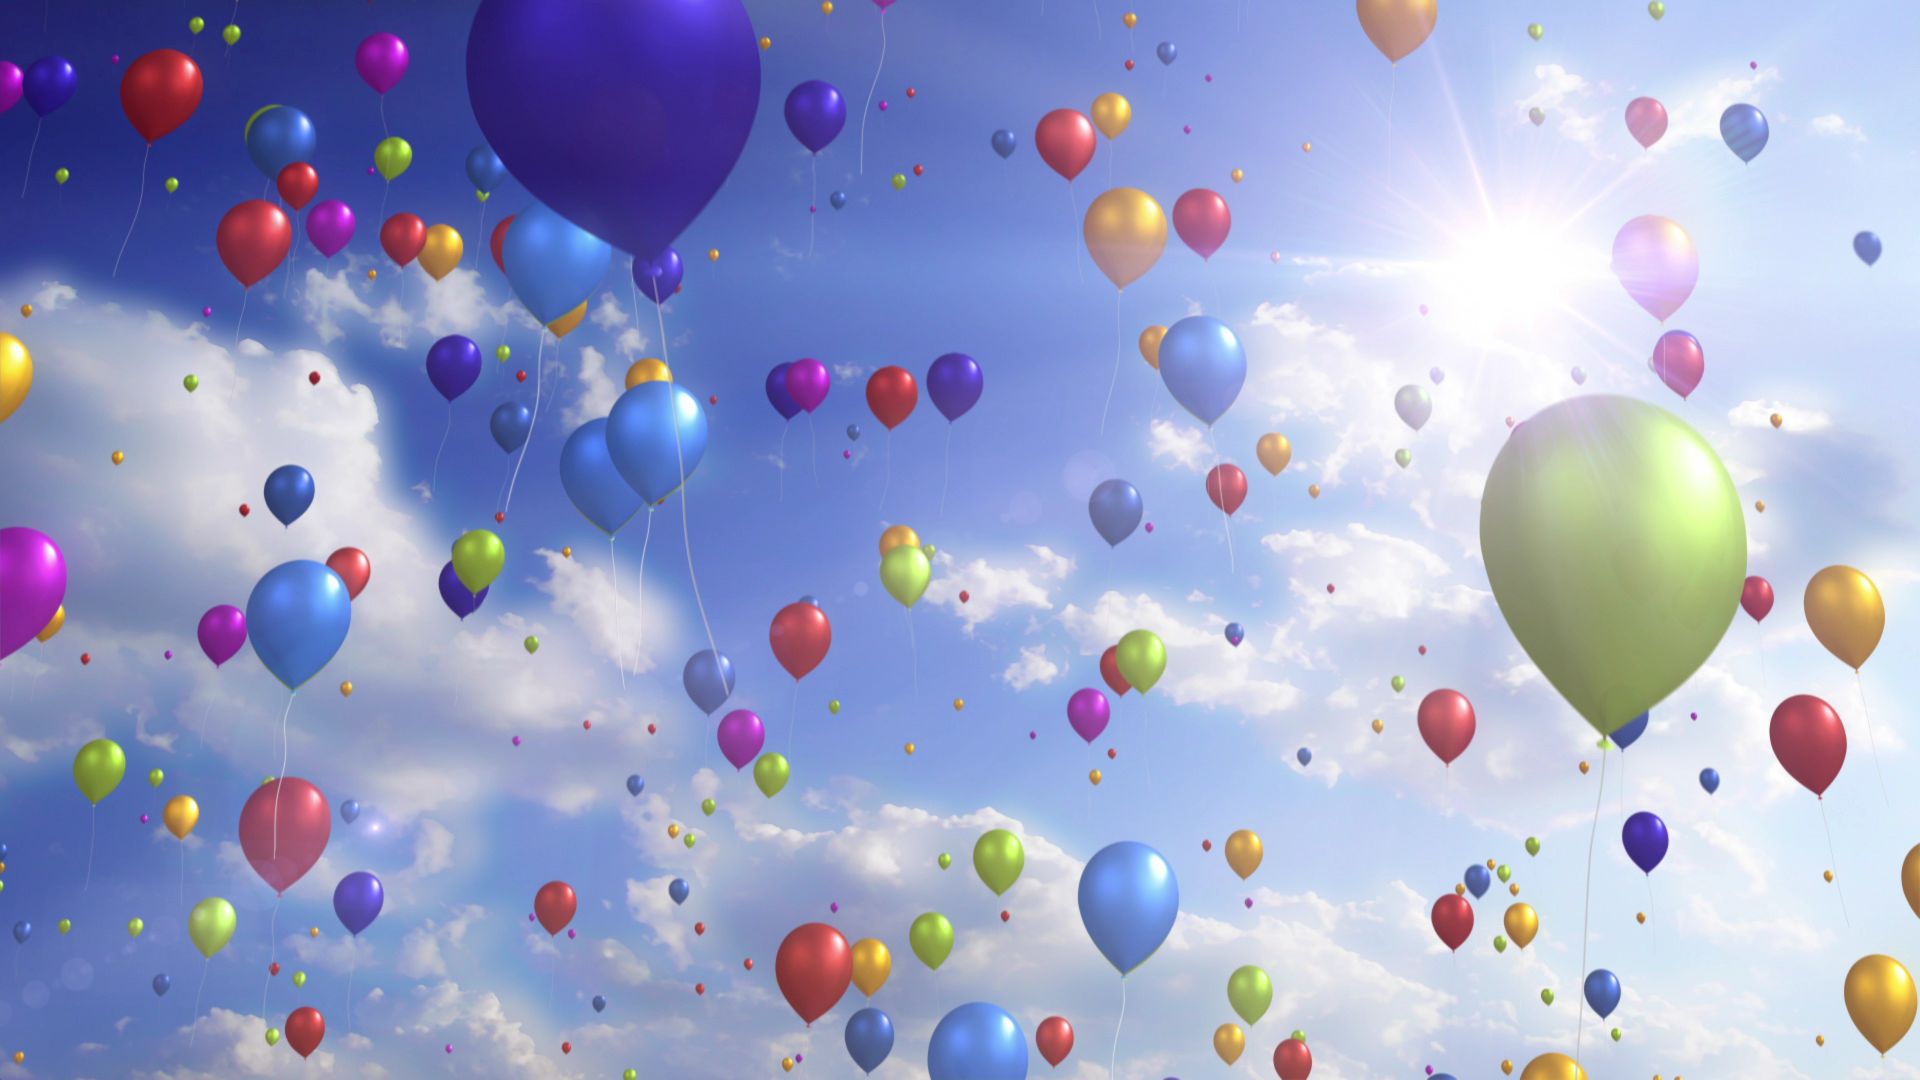 Colorful Balloons | downloops – Creative Motion Backgrounds